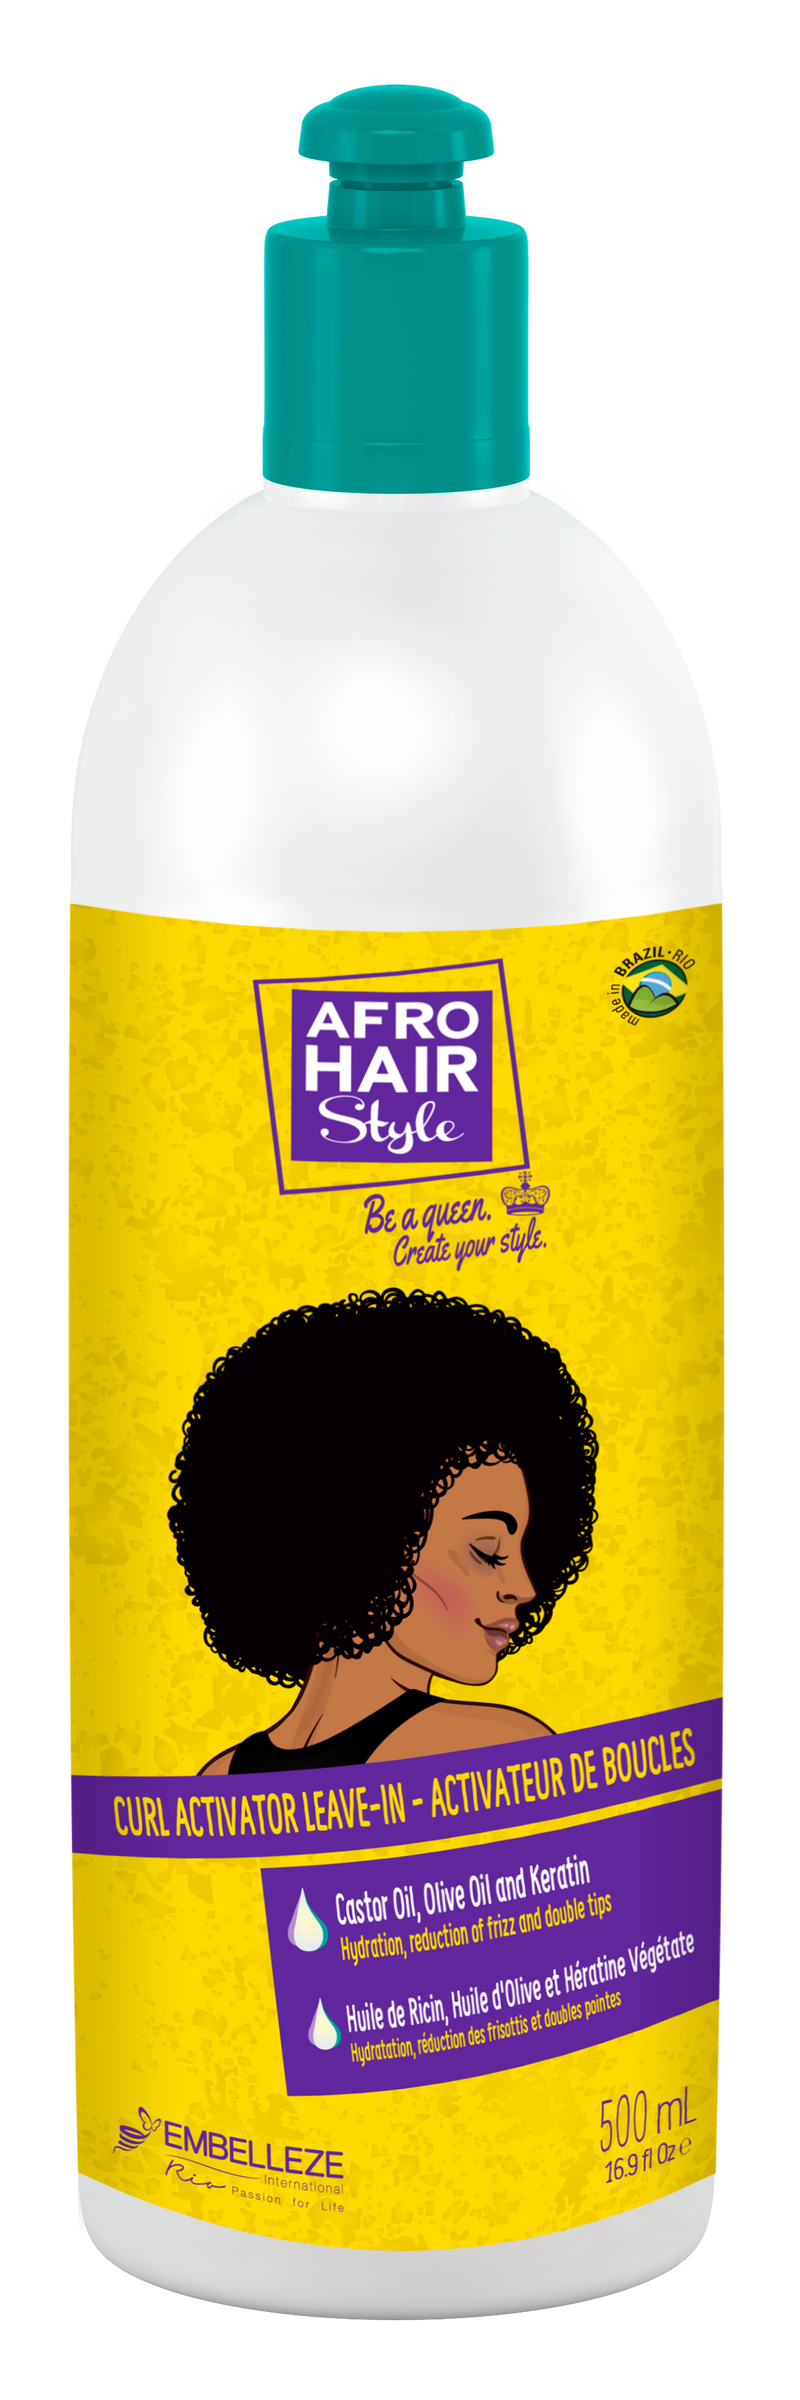 Novex Afrohair Curl Activator Leave- in